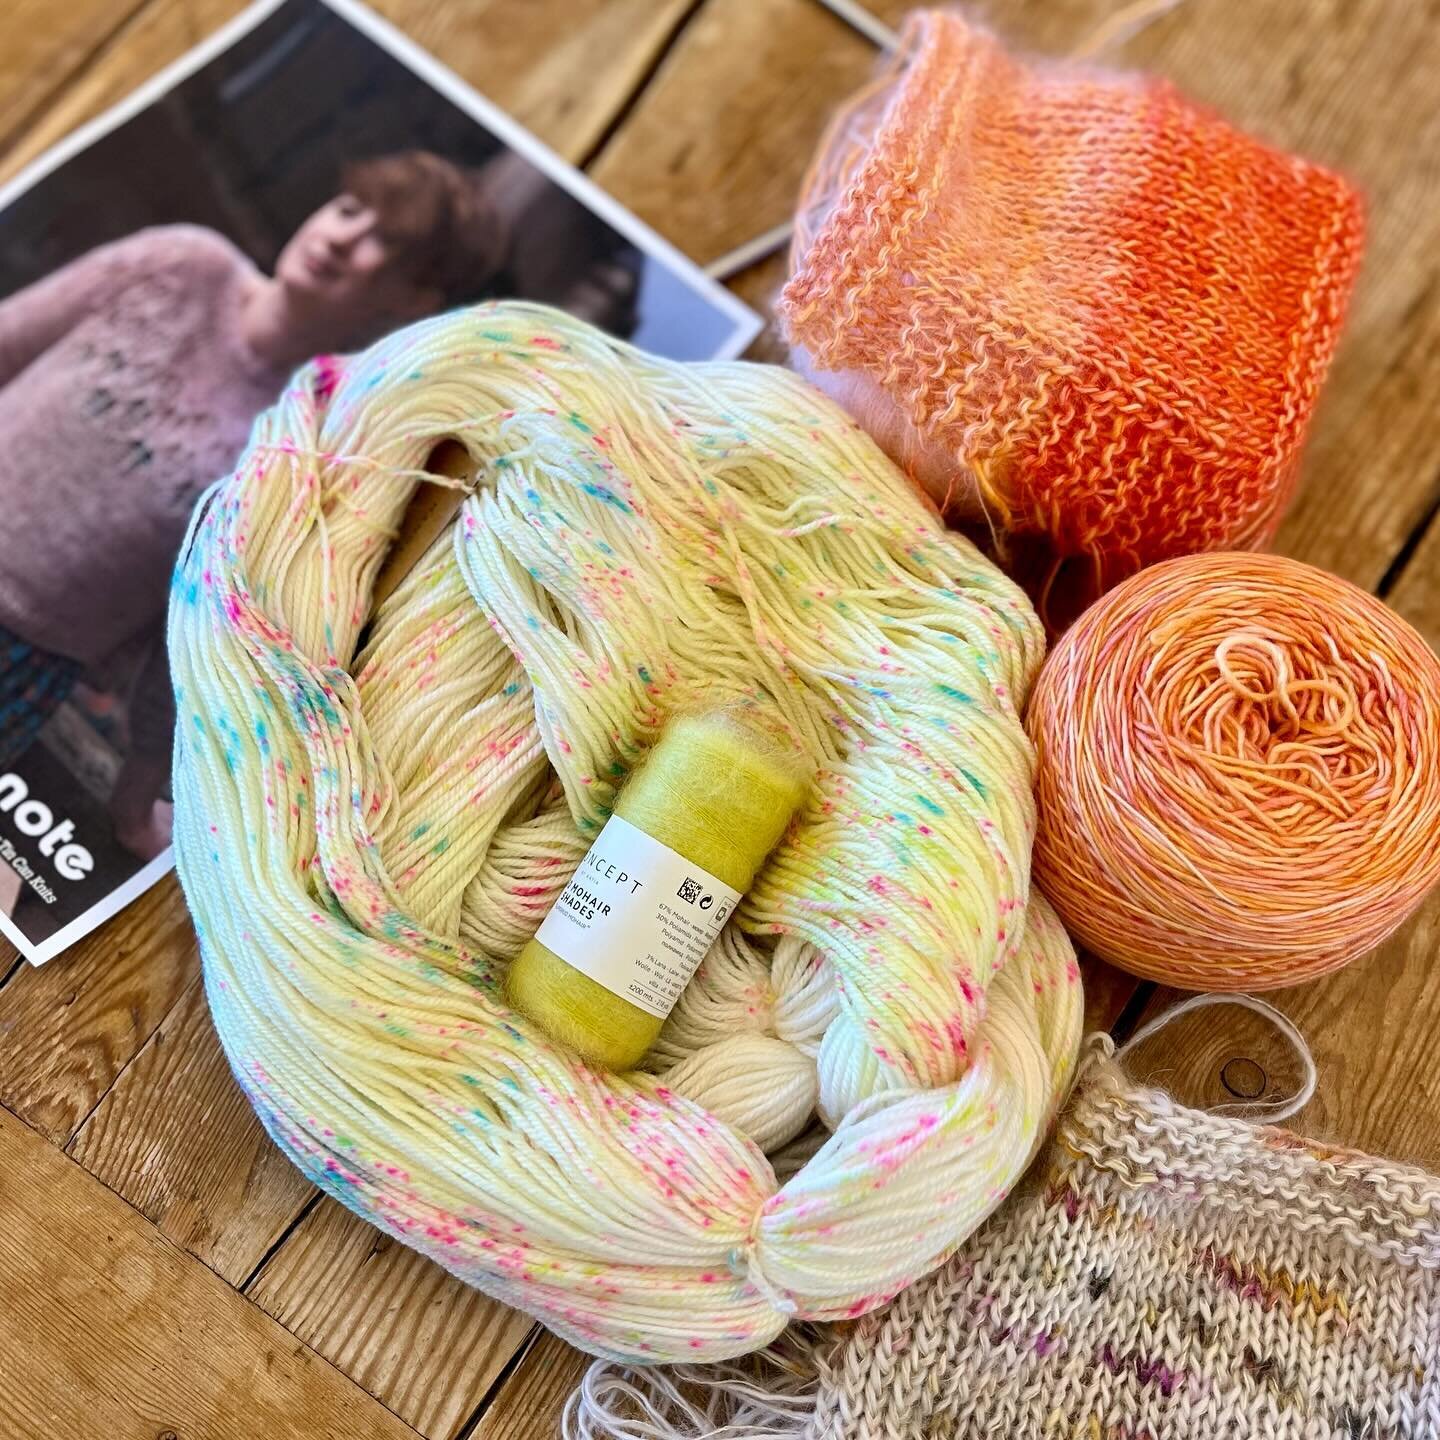 Picking colors, making swatches, and getting prepped for you to join us for a spring knit a long! Come make a sweater with us in March/April! Learn more using the link in our profile.